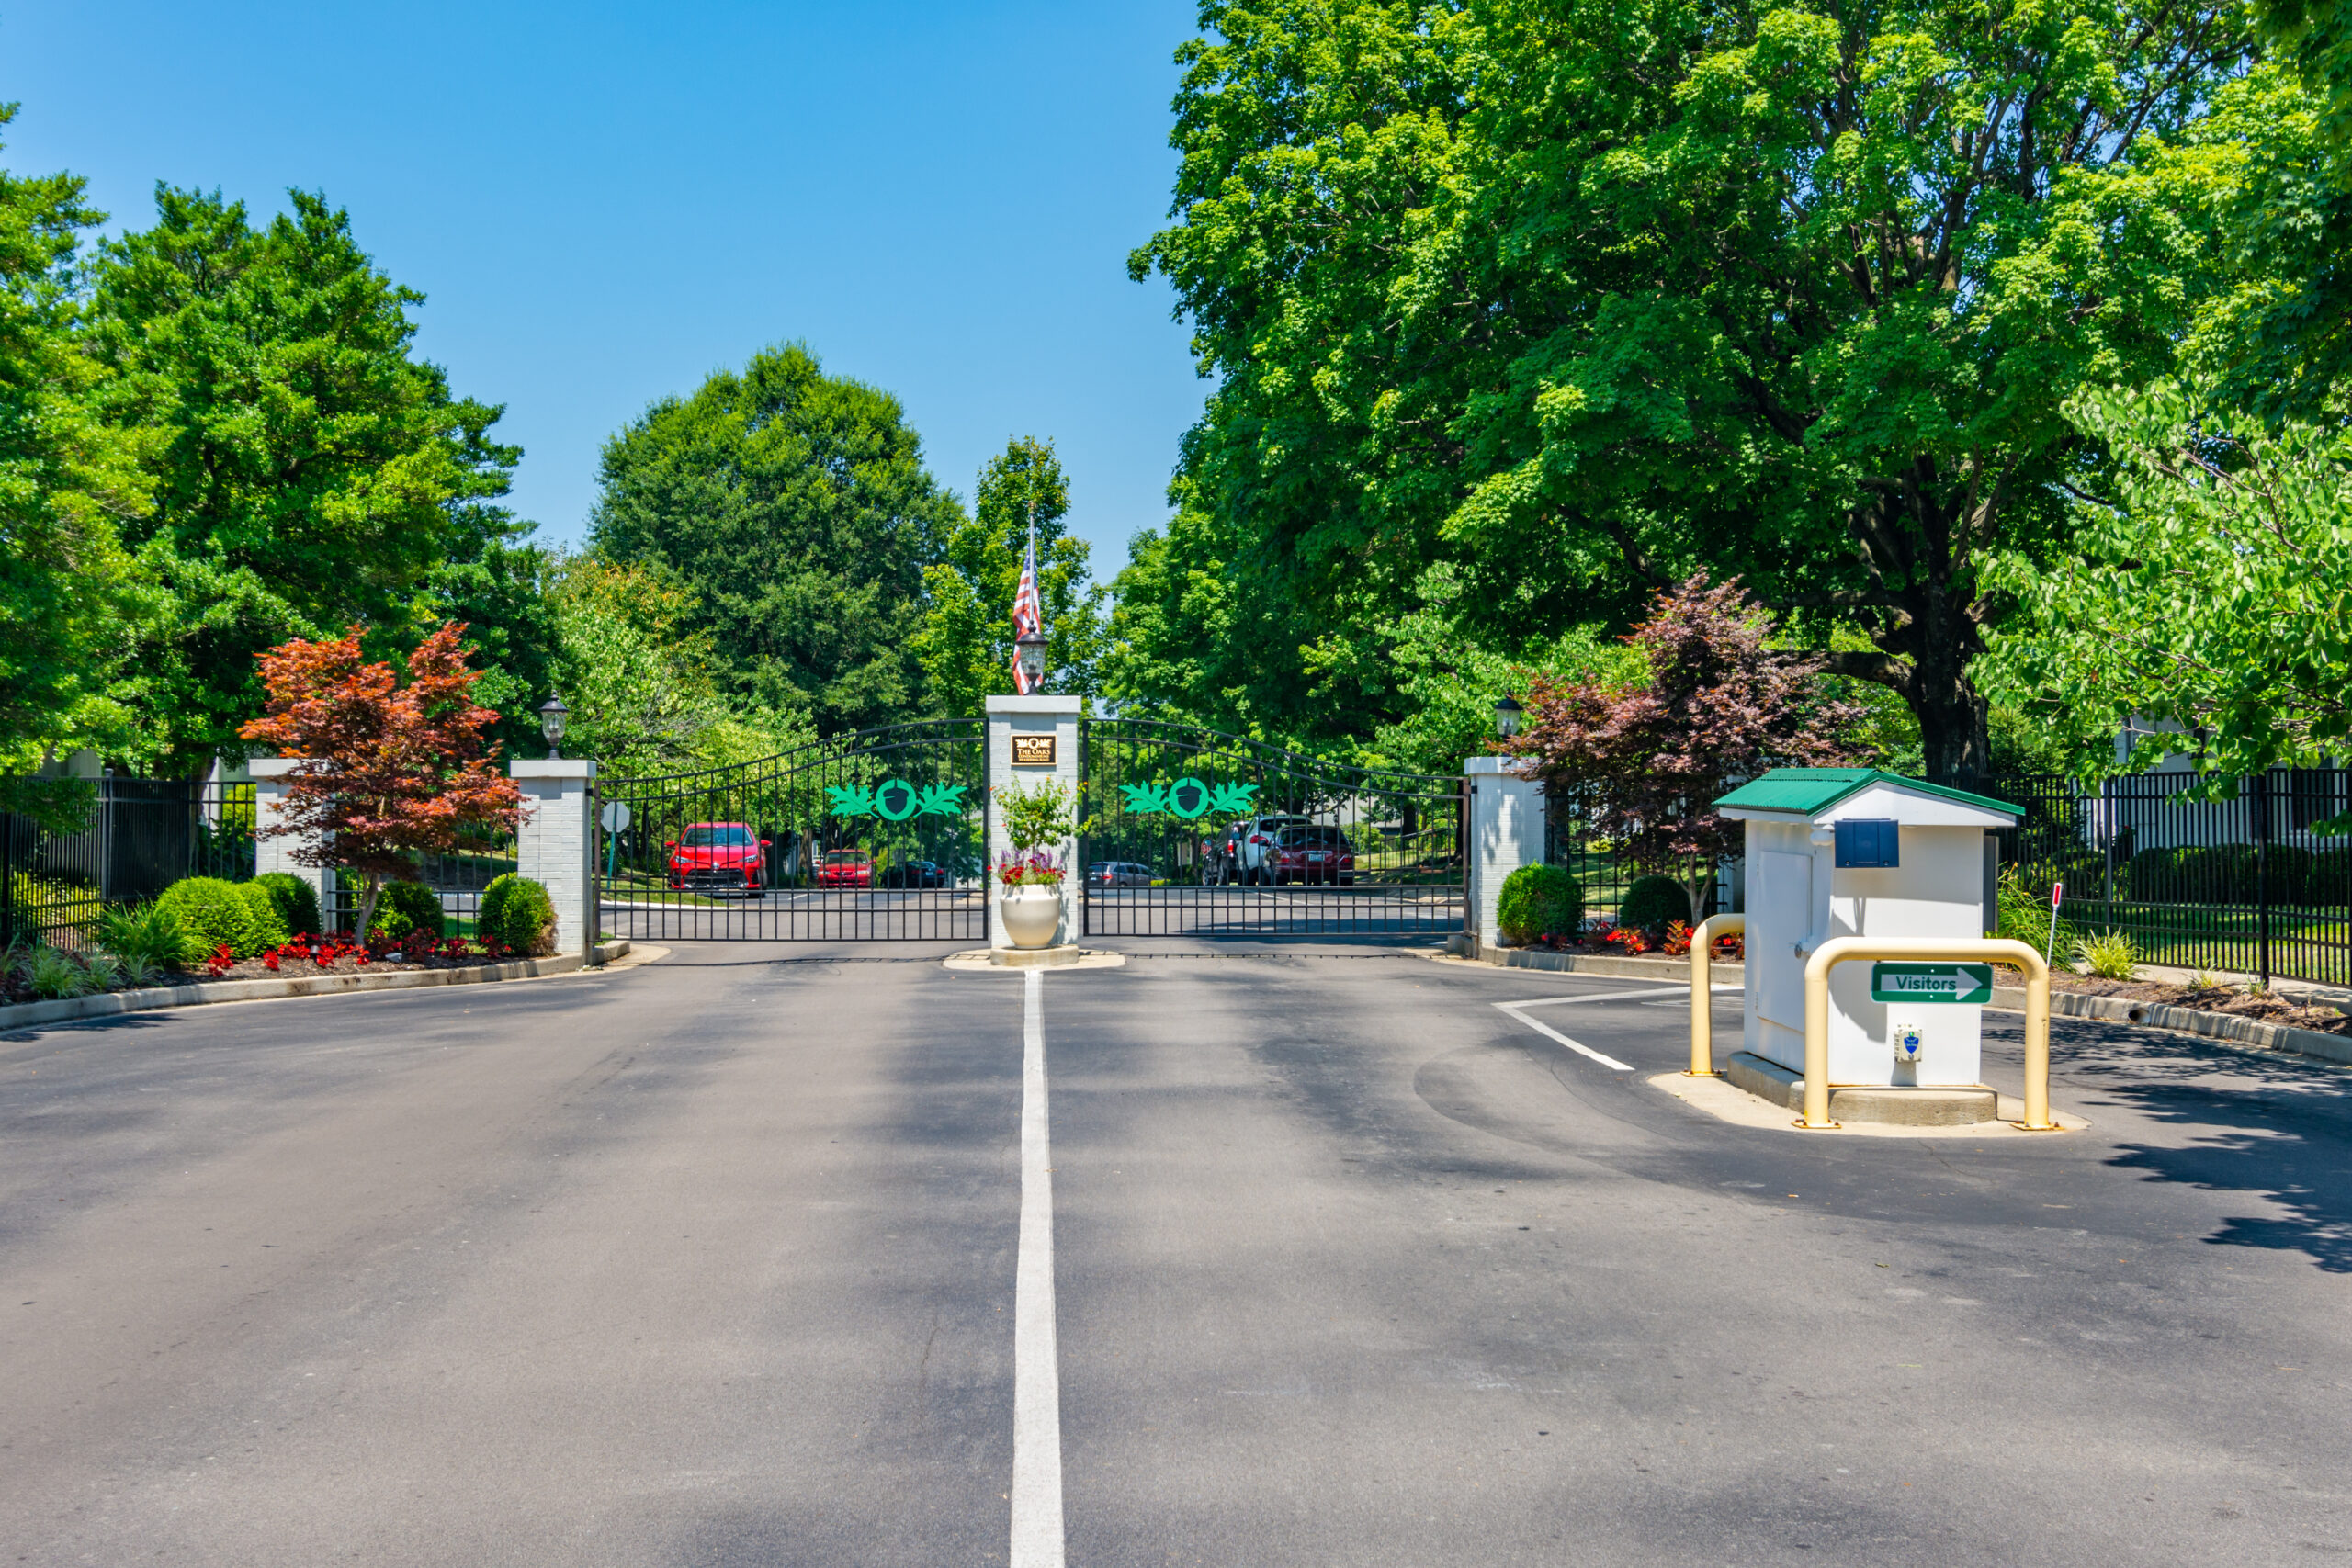 Gated entrance to upscale suburban neighborhood in Midwest America